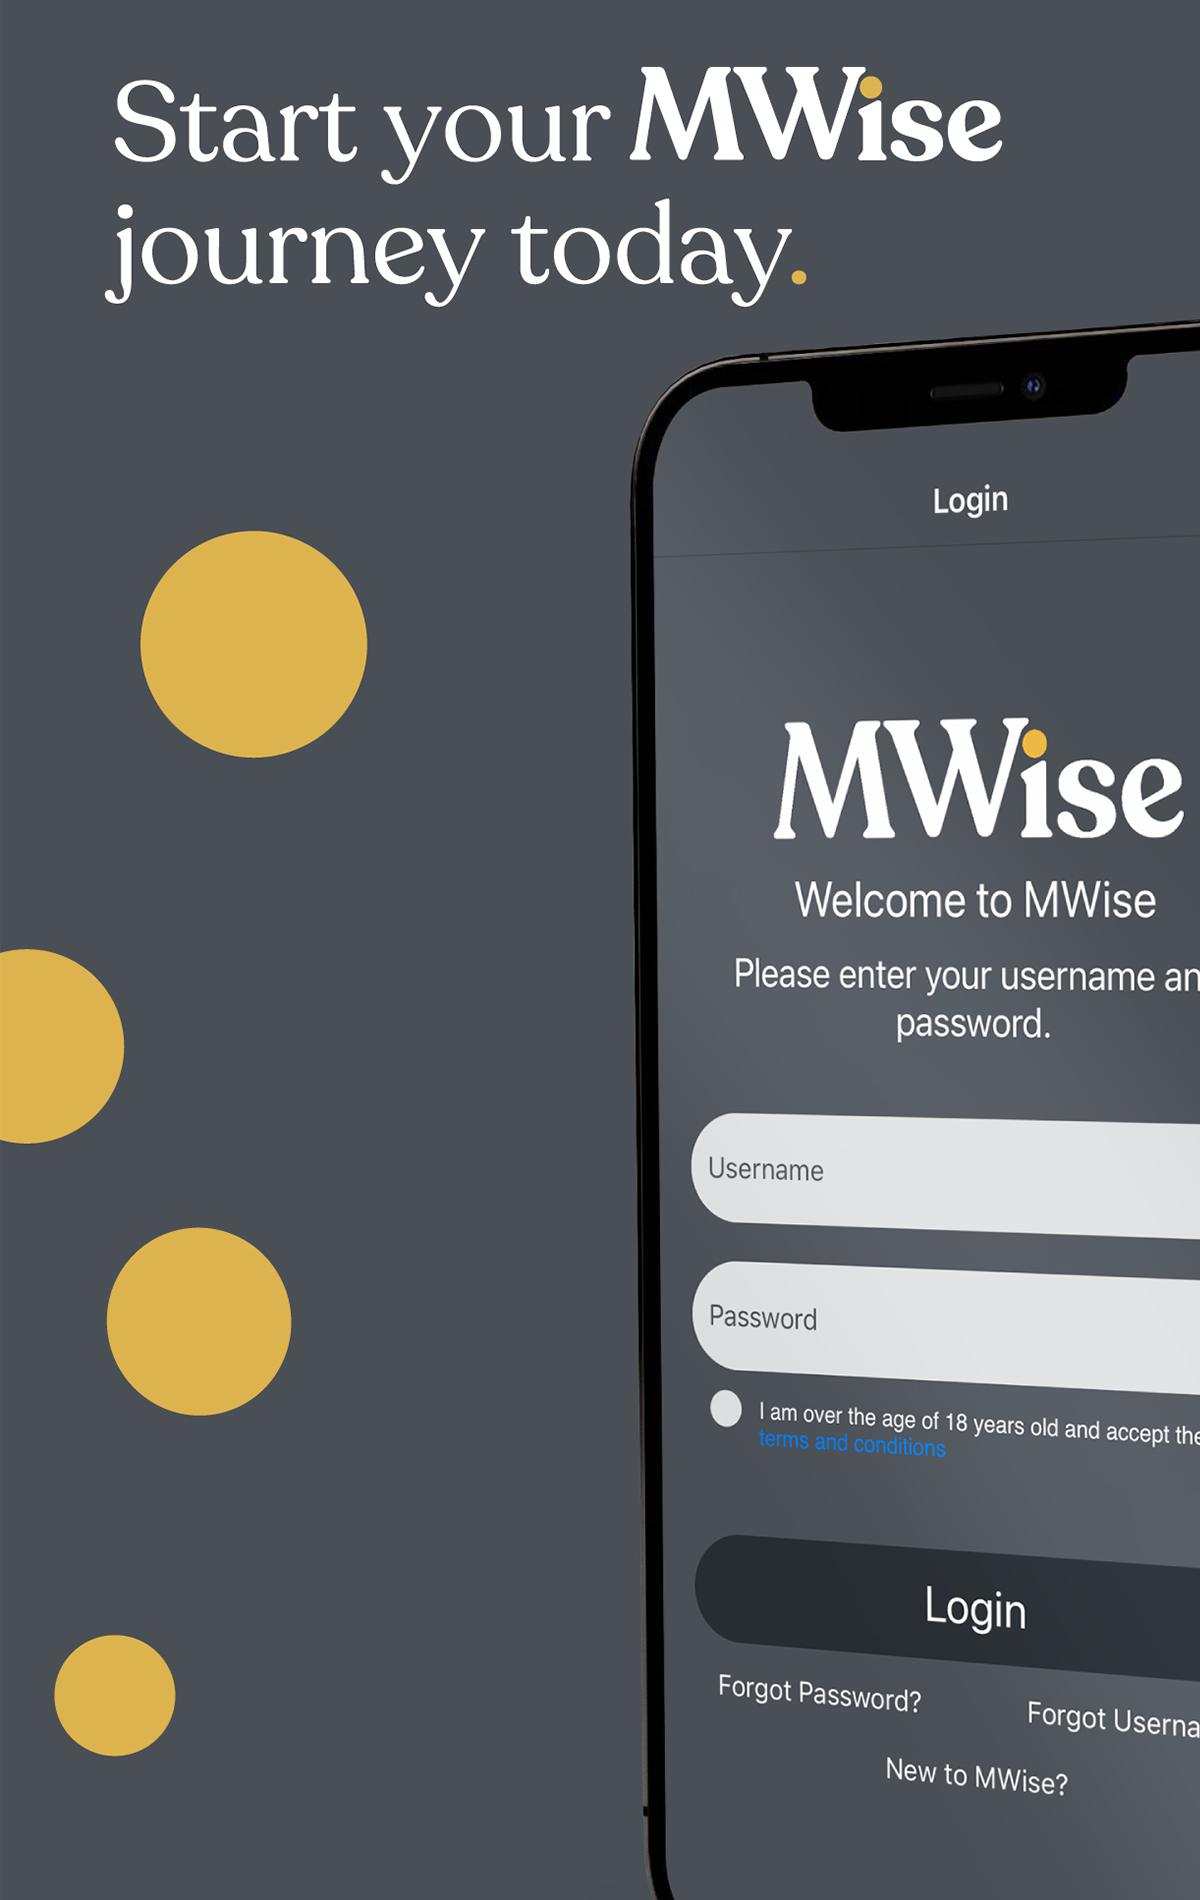 Start your MWise journey today